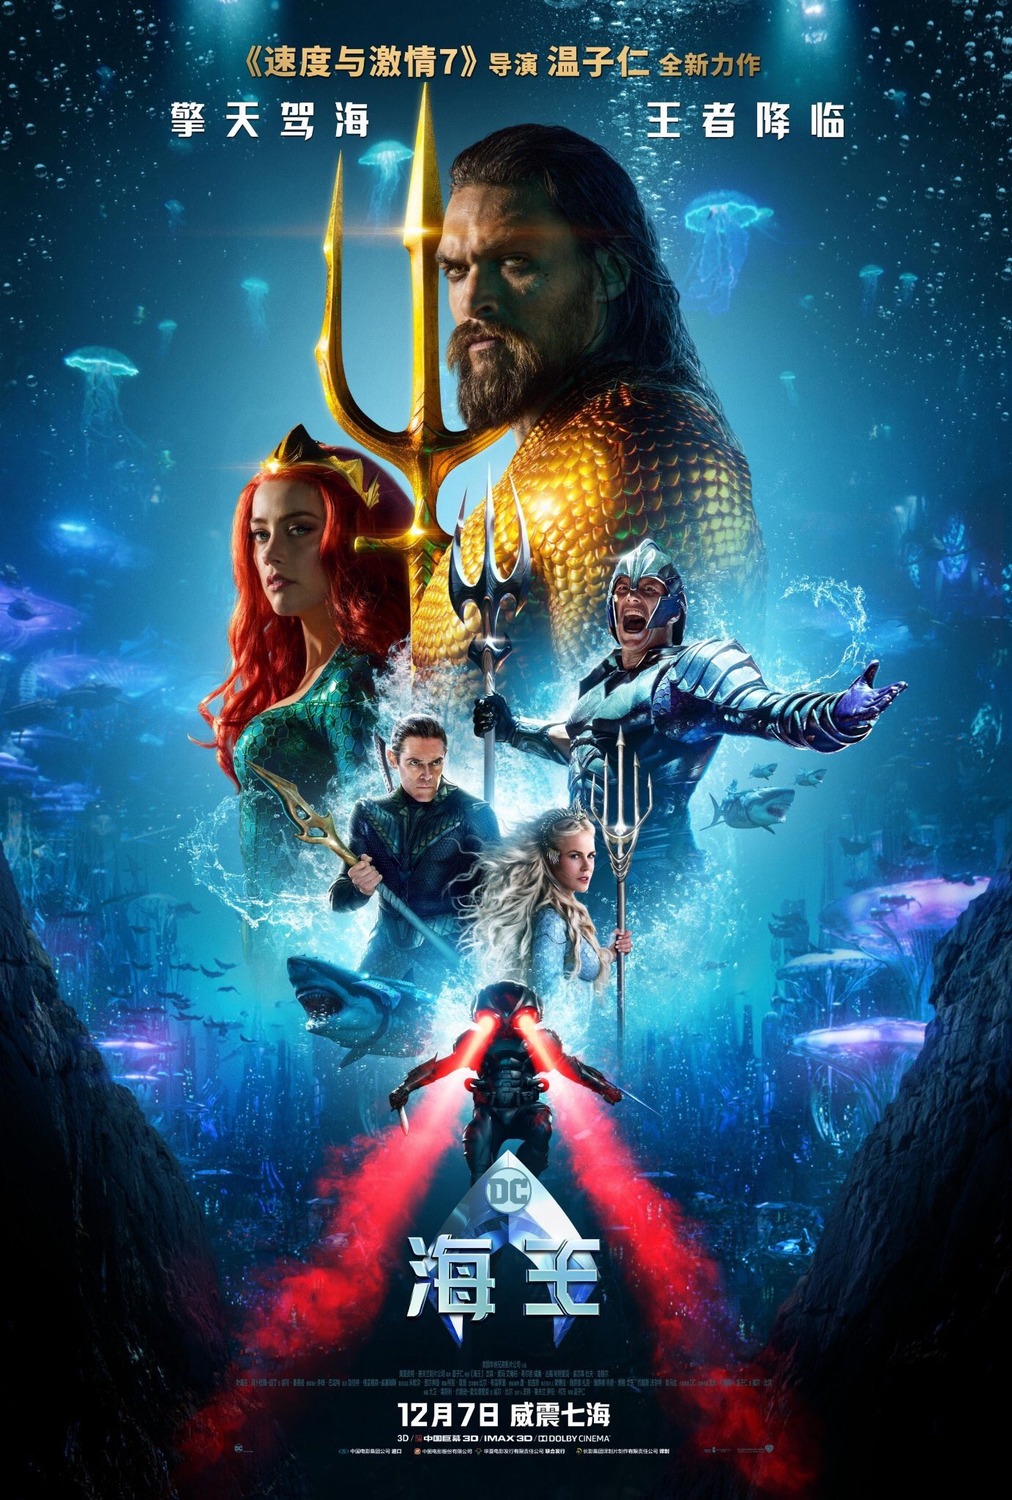 Extra Large Movie Poster Image for Aquaman (#17 of 22)